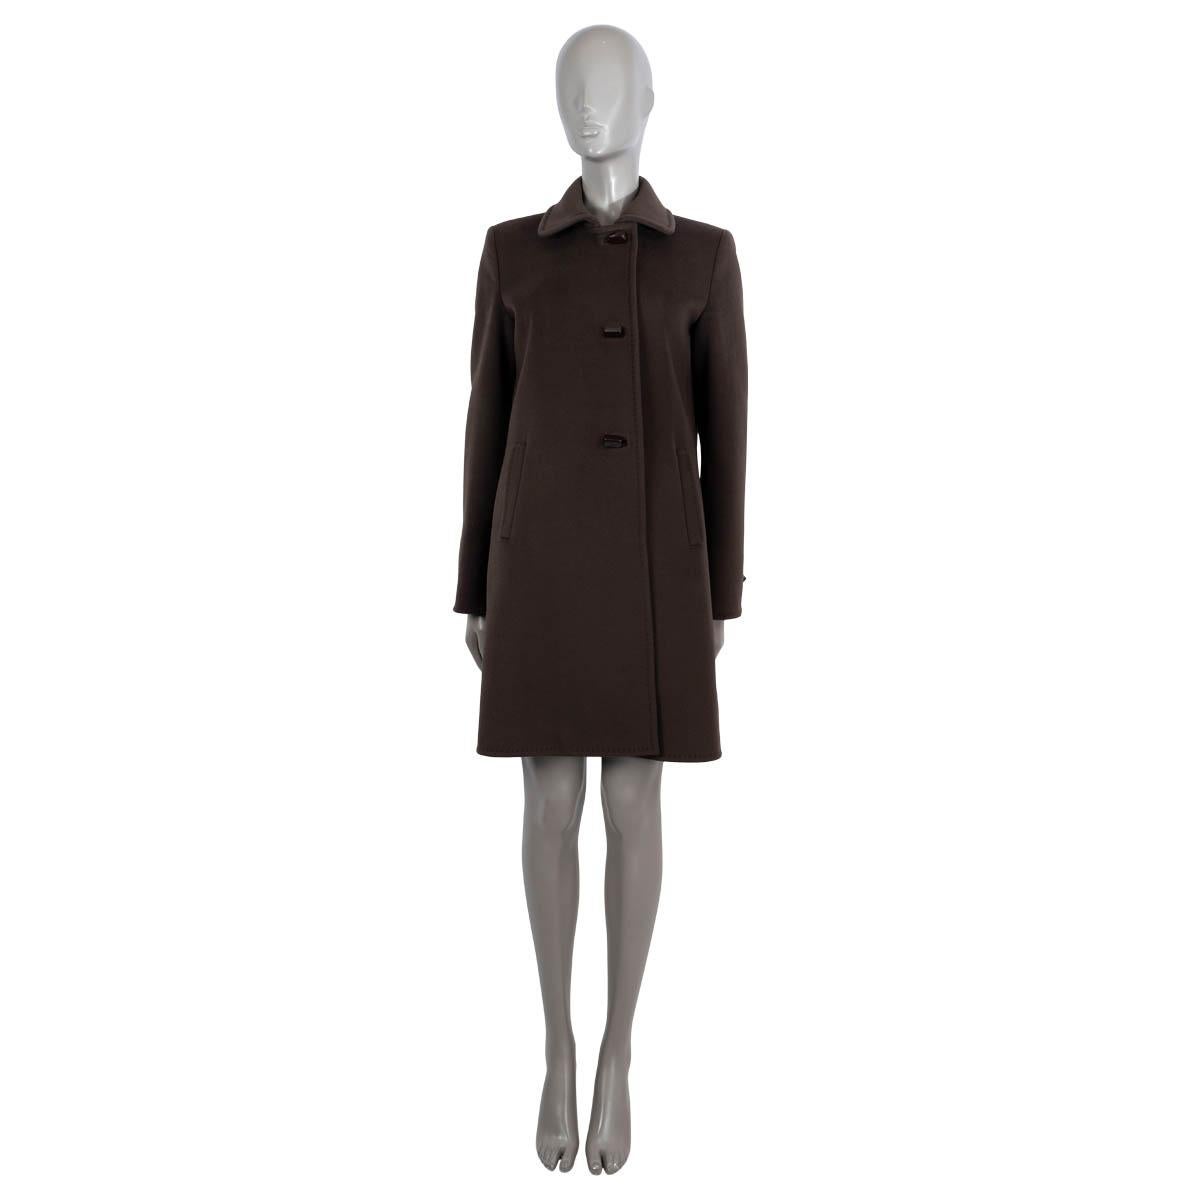 100% authentic Loro Piana single-breasted coat in chocolate brown cashmere (assumingly - please note content tag is illegible). Features top-stitching details and two slant pockets at the waist. Closes with gunmetal toggle-style buttons. Lined in